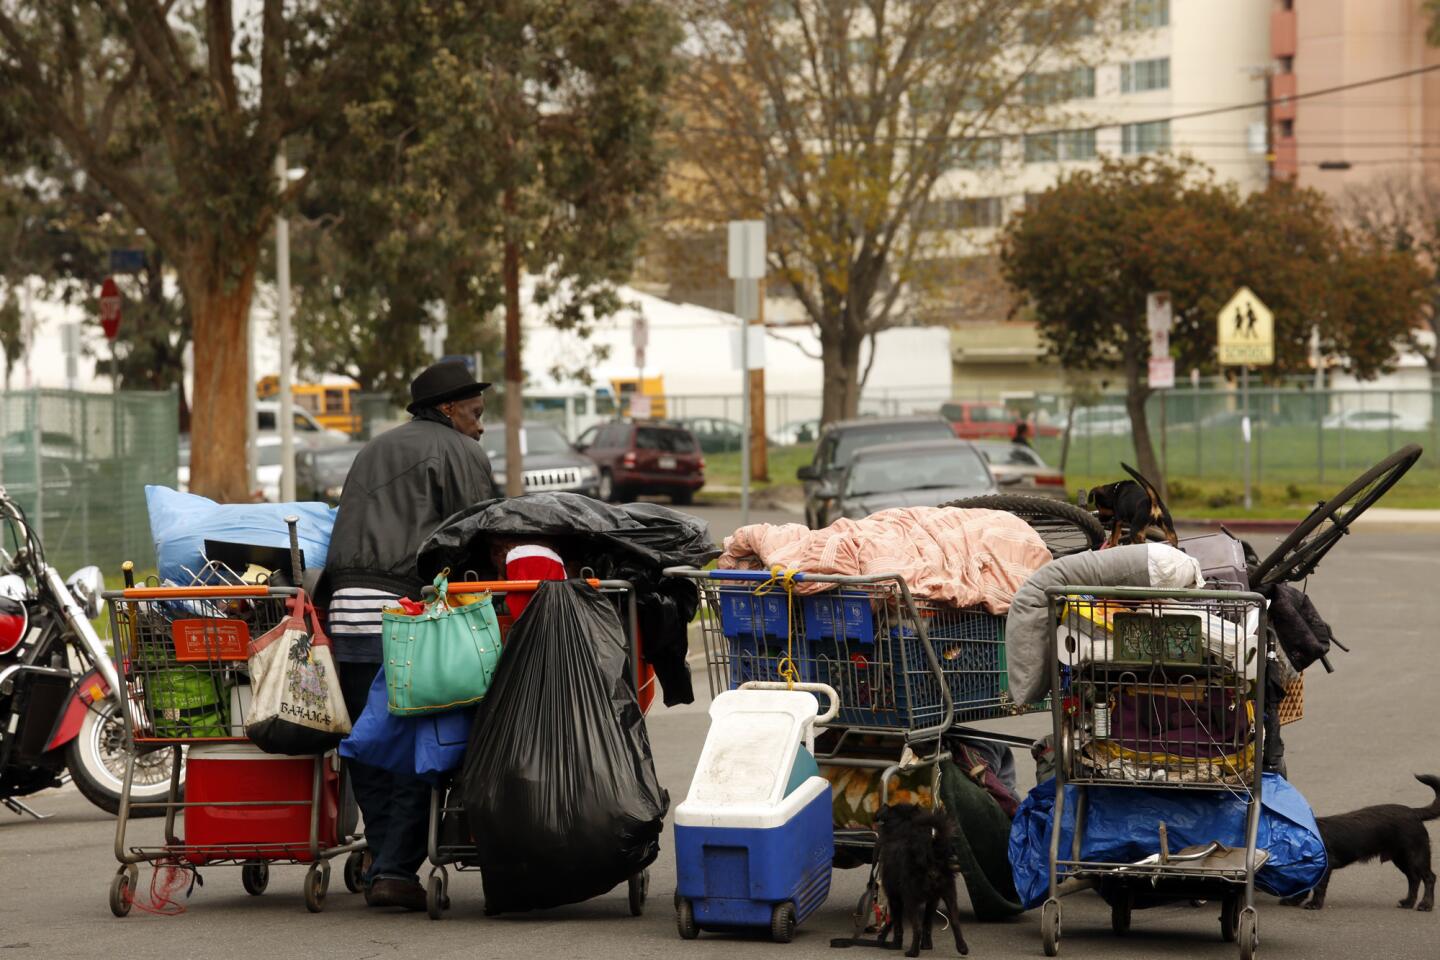 Ricky Riller carries his belongings and dogs in shopping carts before sanitation workers sweep the homeless encampments in the Manchester Square neighborhood in Los Angeles.